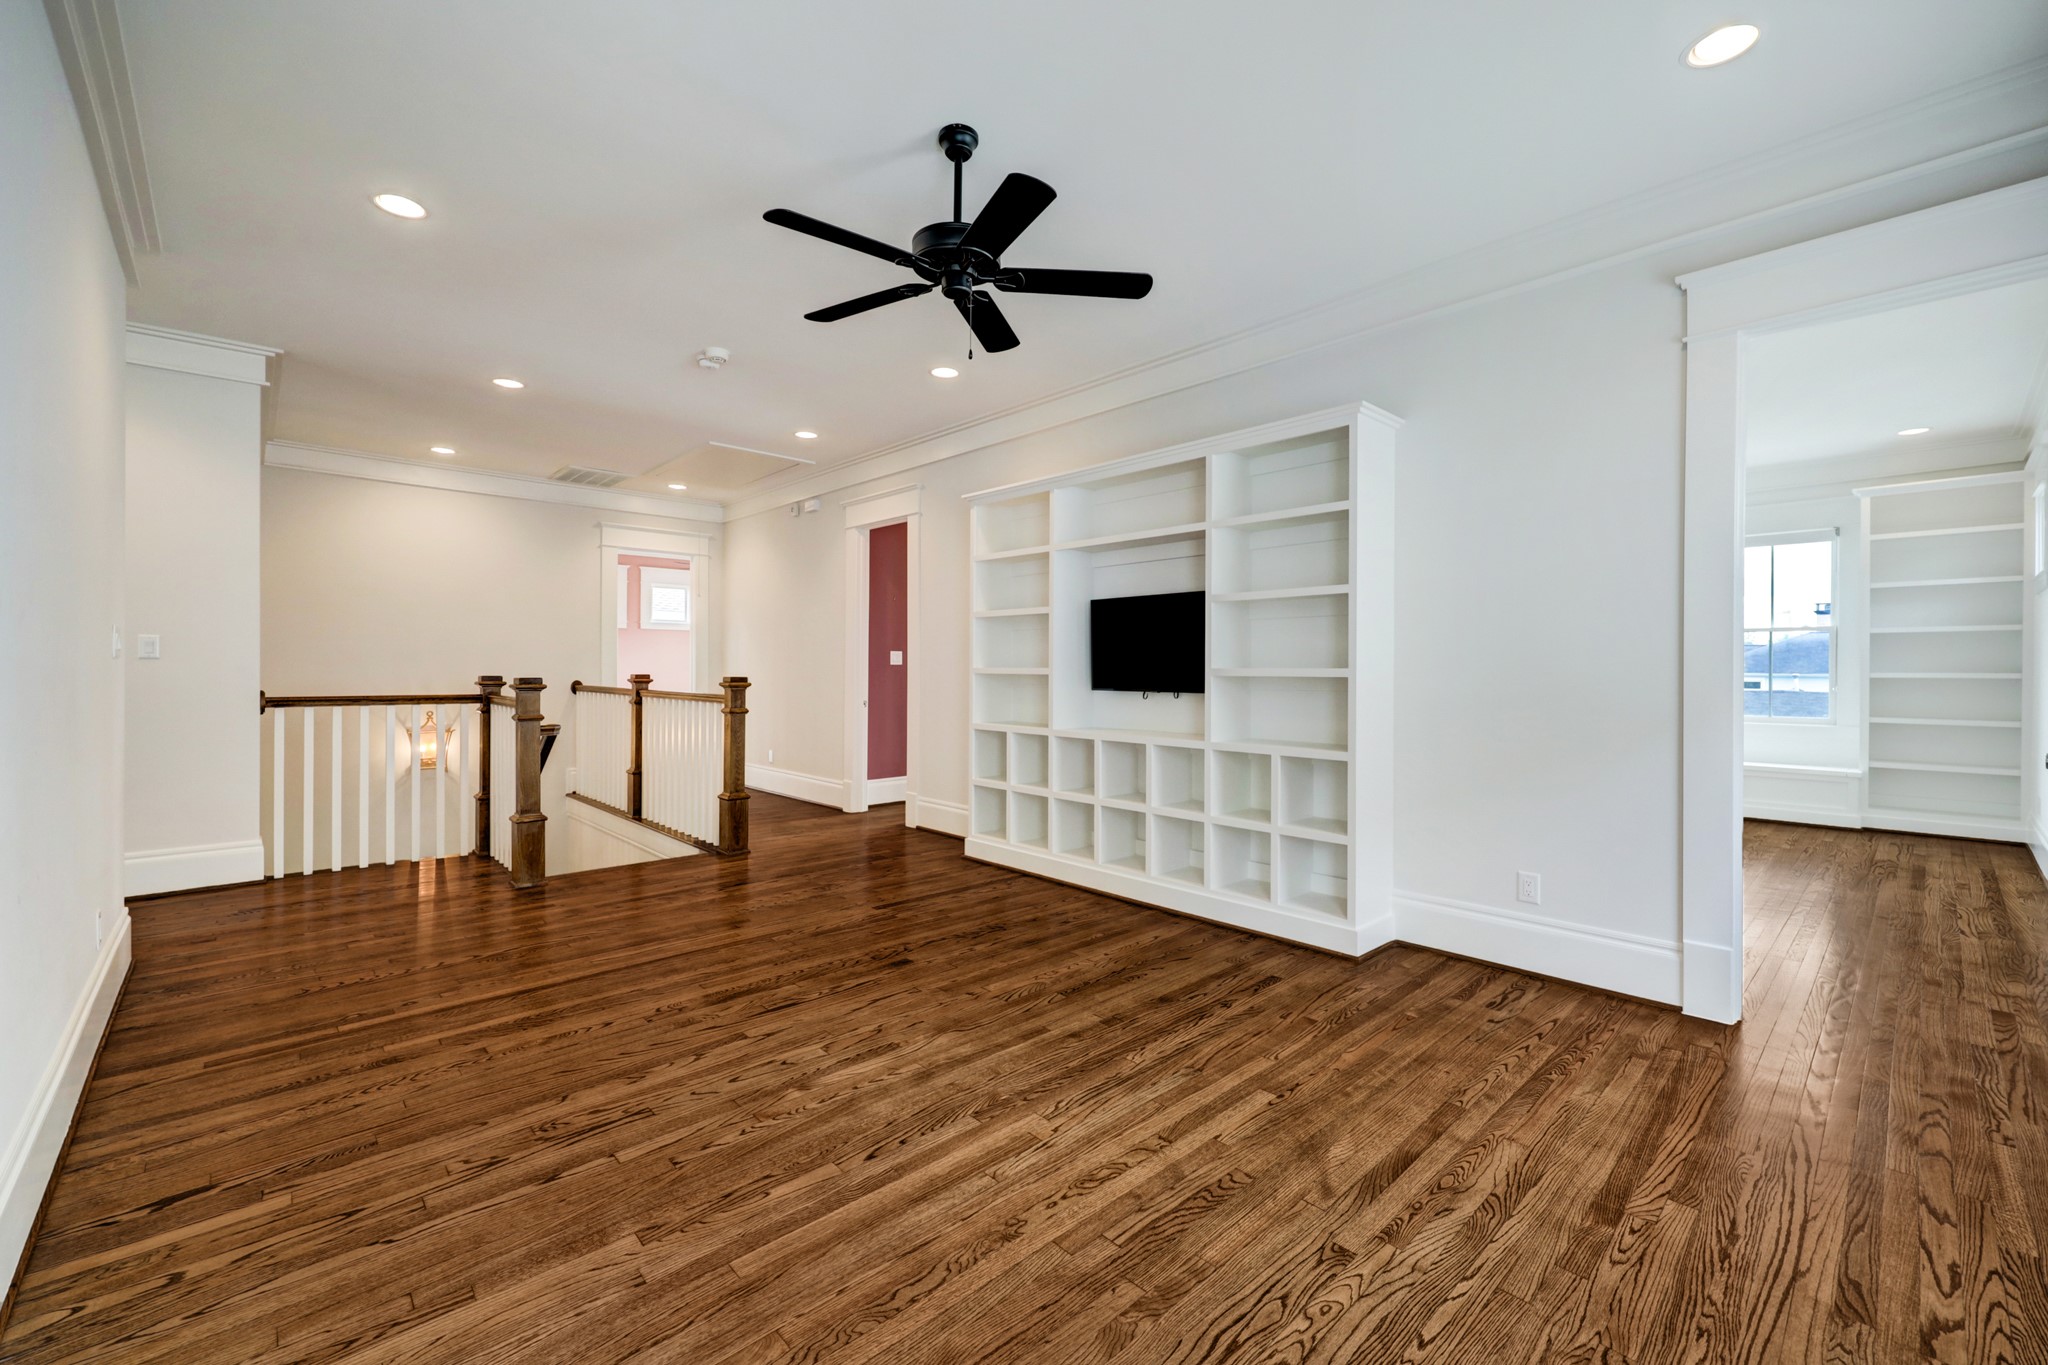 Upstairs, enjoy more living space in the second-floor game room lined by abundant custom shelving with A/V wiring in place.